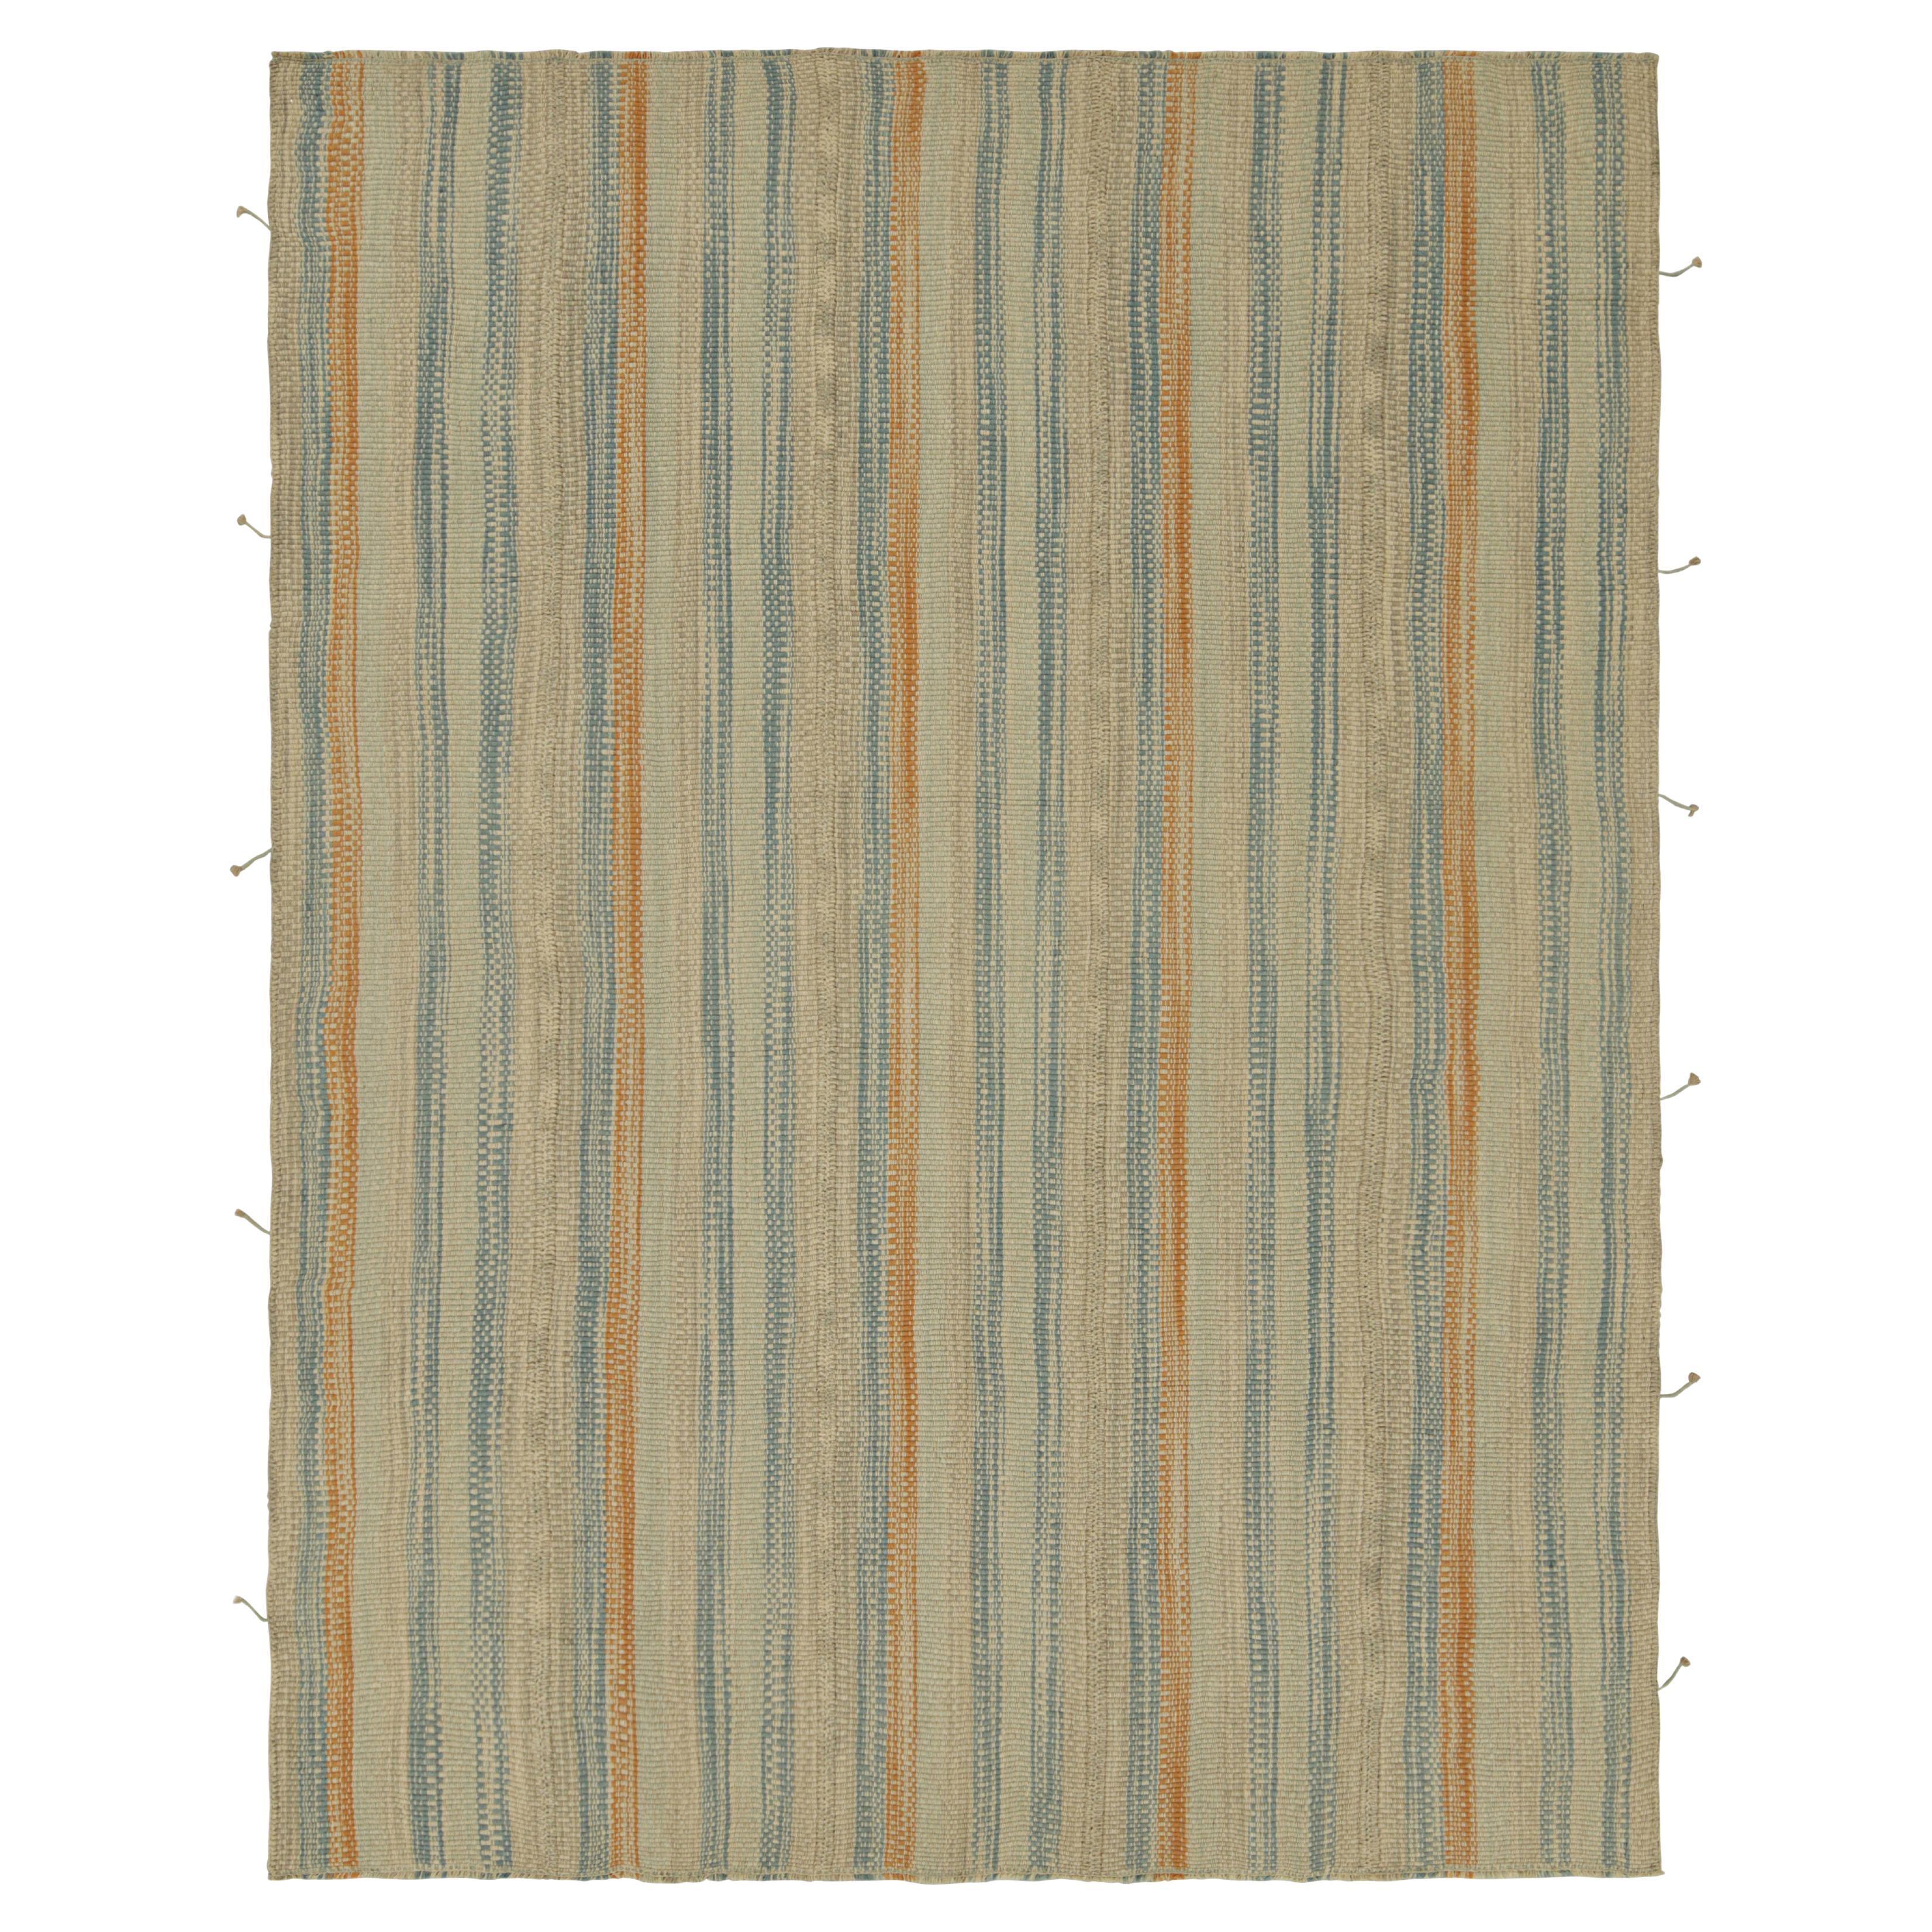 Rug & Kilim’s Contemporary Kilim in Beige, Rust and Blue Textural Stripes For Sale